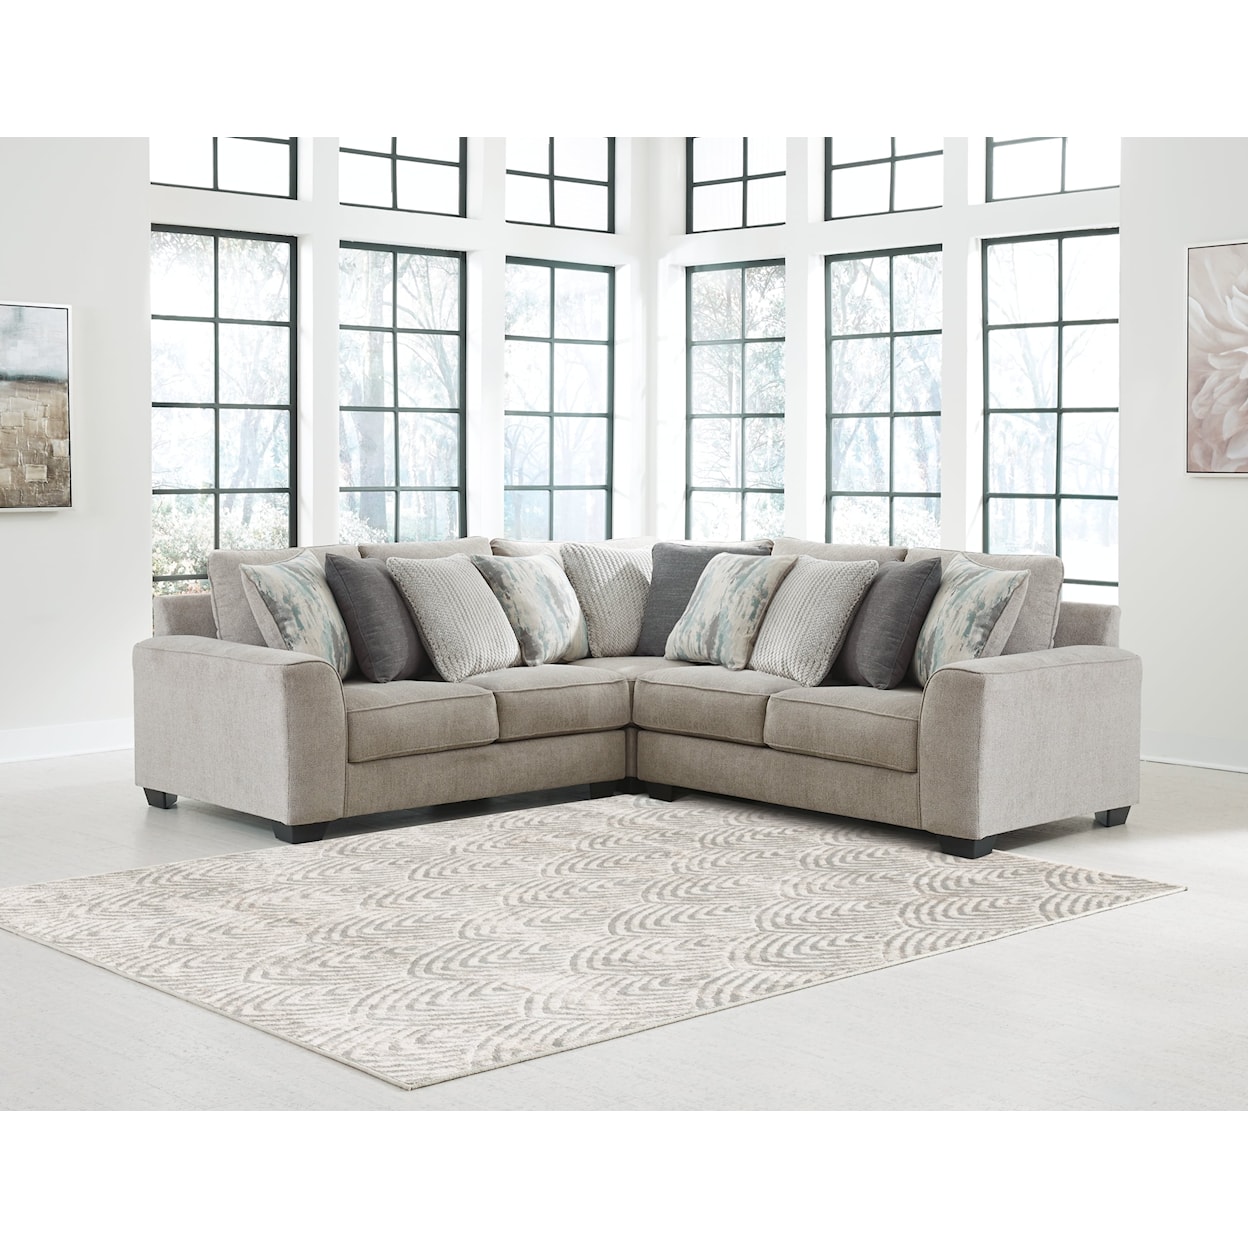 Benchcraft Ardsley 3-Piece Sectional